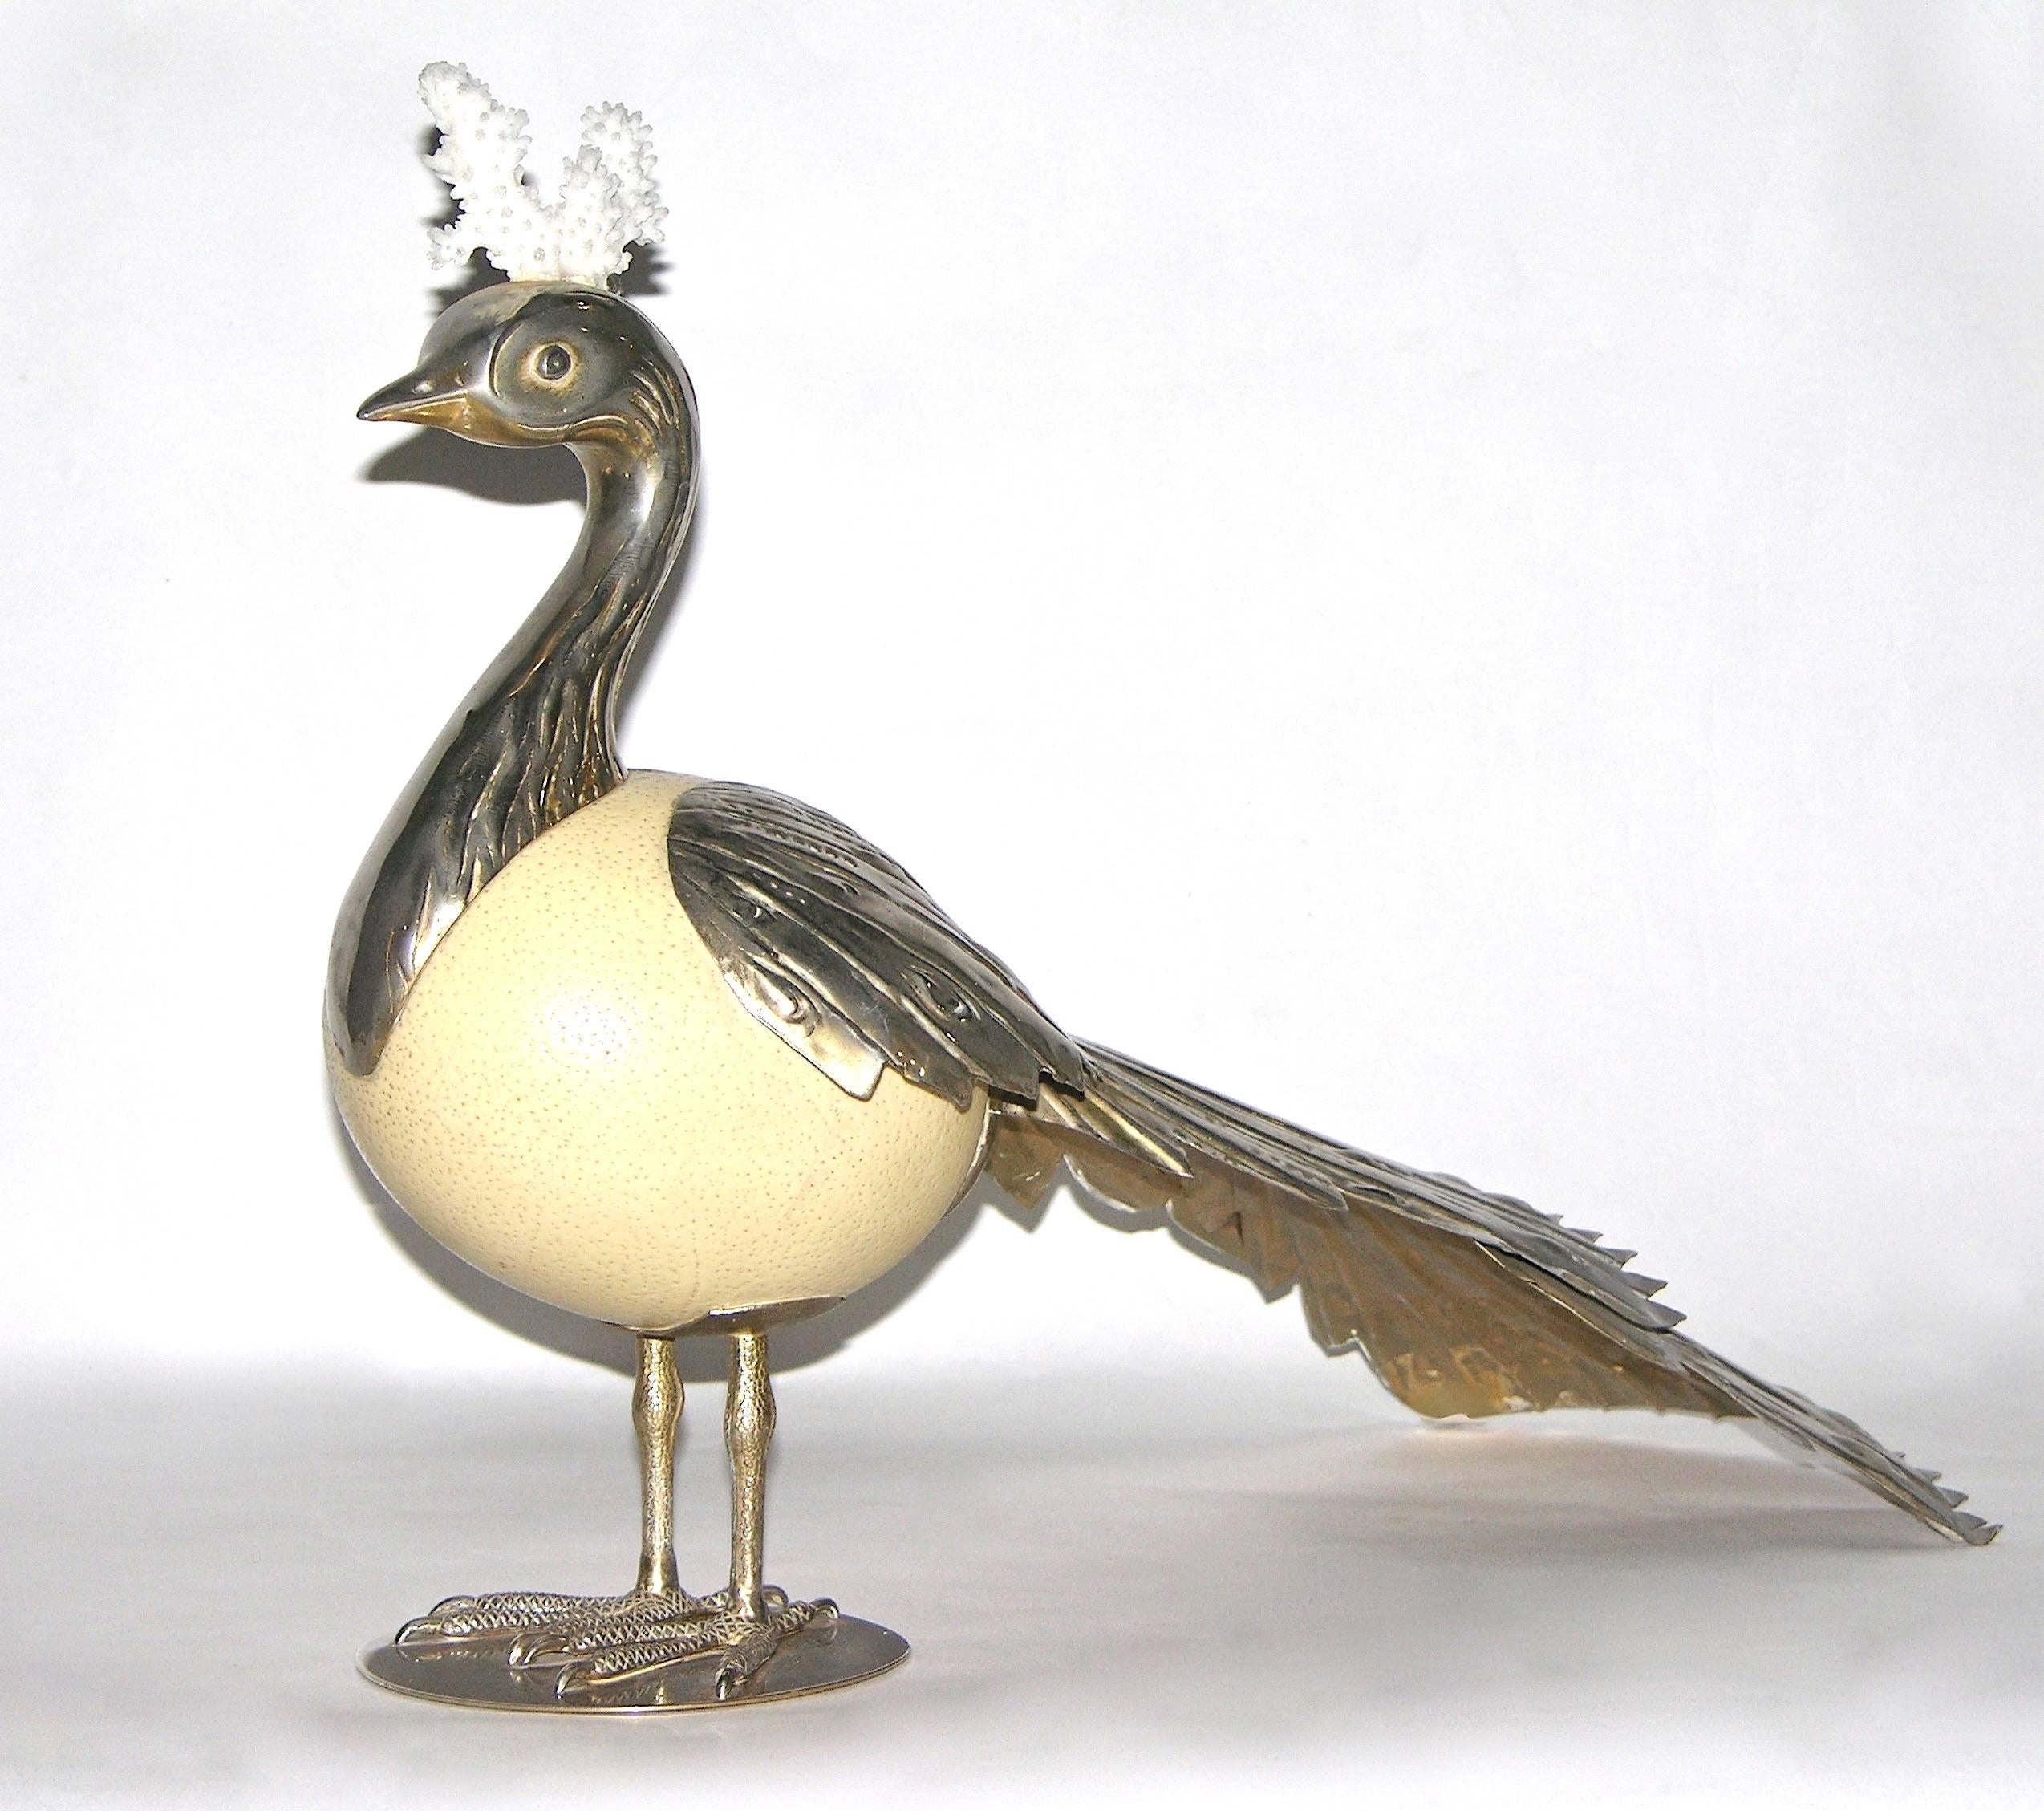 This one-of-a-kind Italian Work of Art, a sculpture bird by Antonio Pavia, is a rare highly collectible object, entirely handcrafted, with an ostrich egg as the body, decorated with an impressive chased silver plated long feathered tail and topped